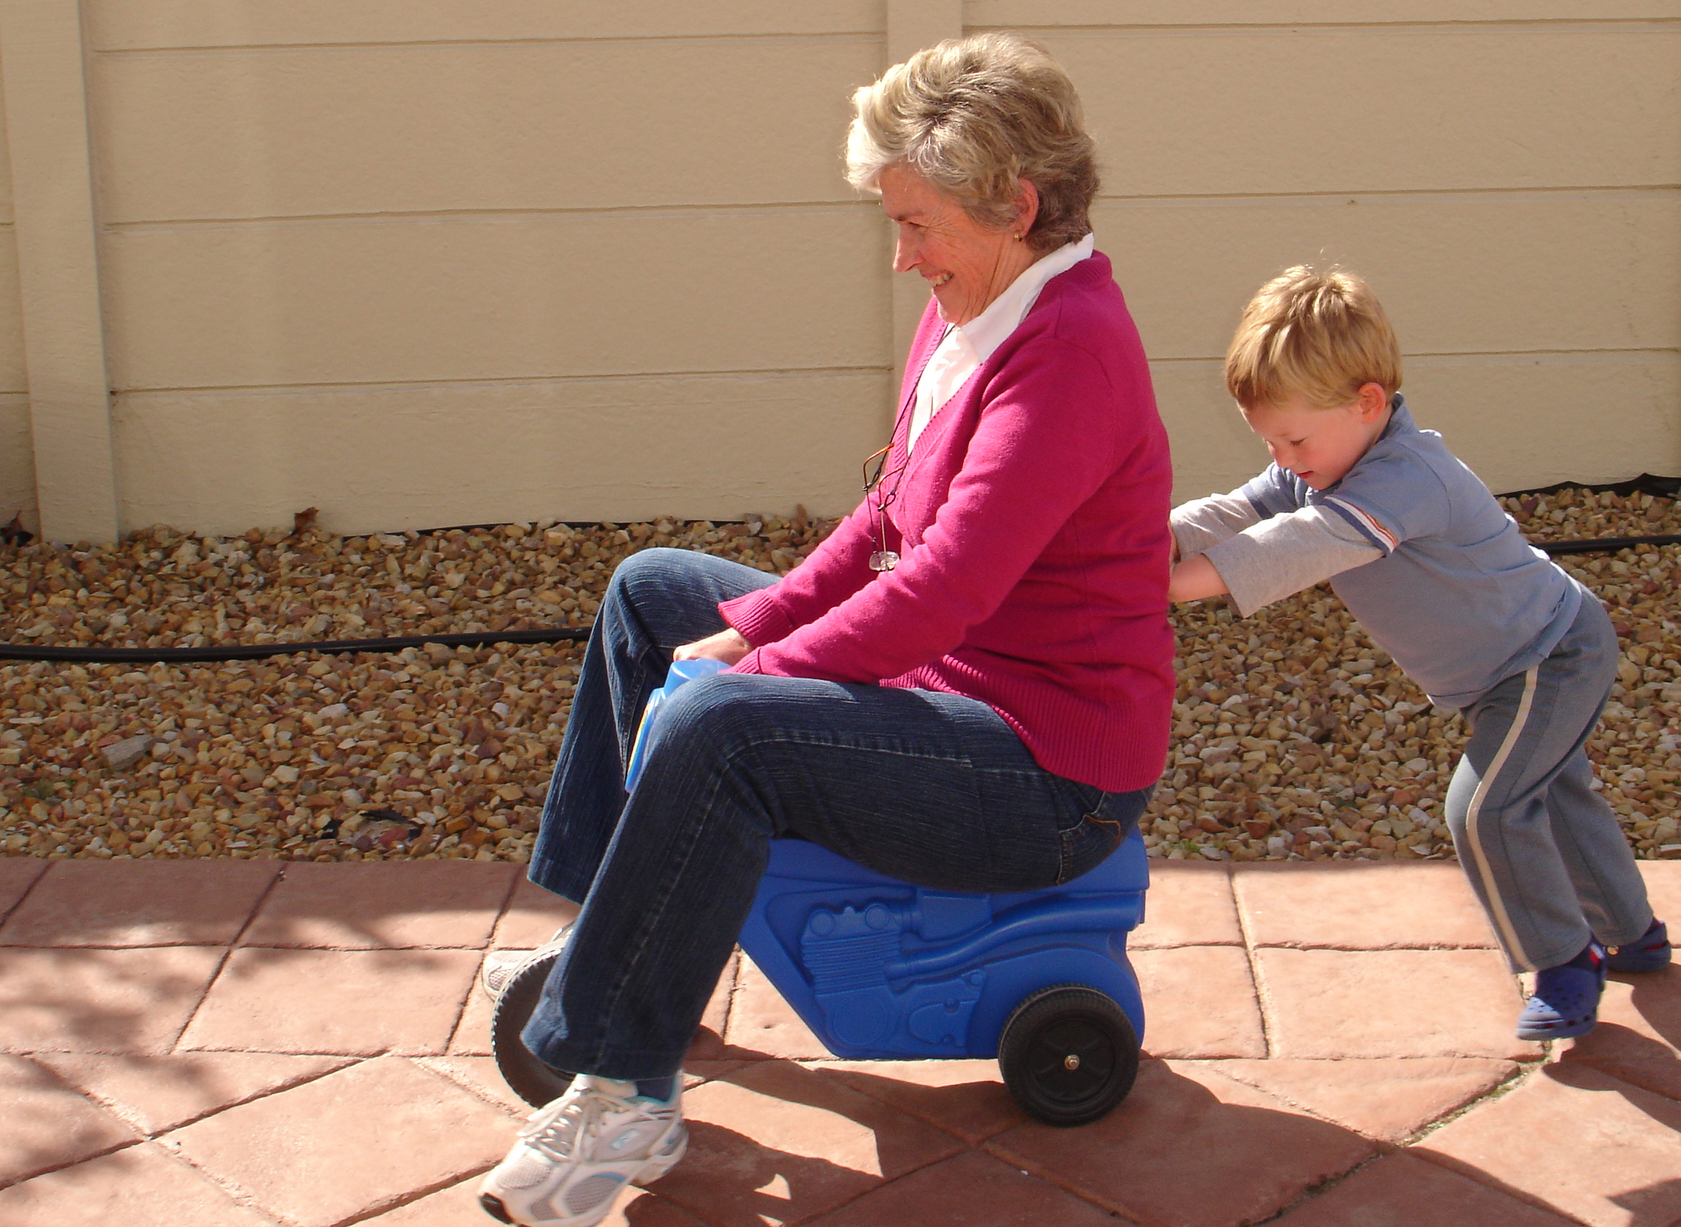 Grandmother riding on a toy tricycle being pushed by her grandson